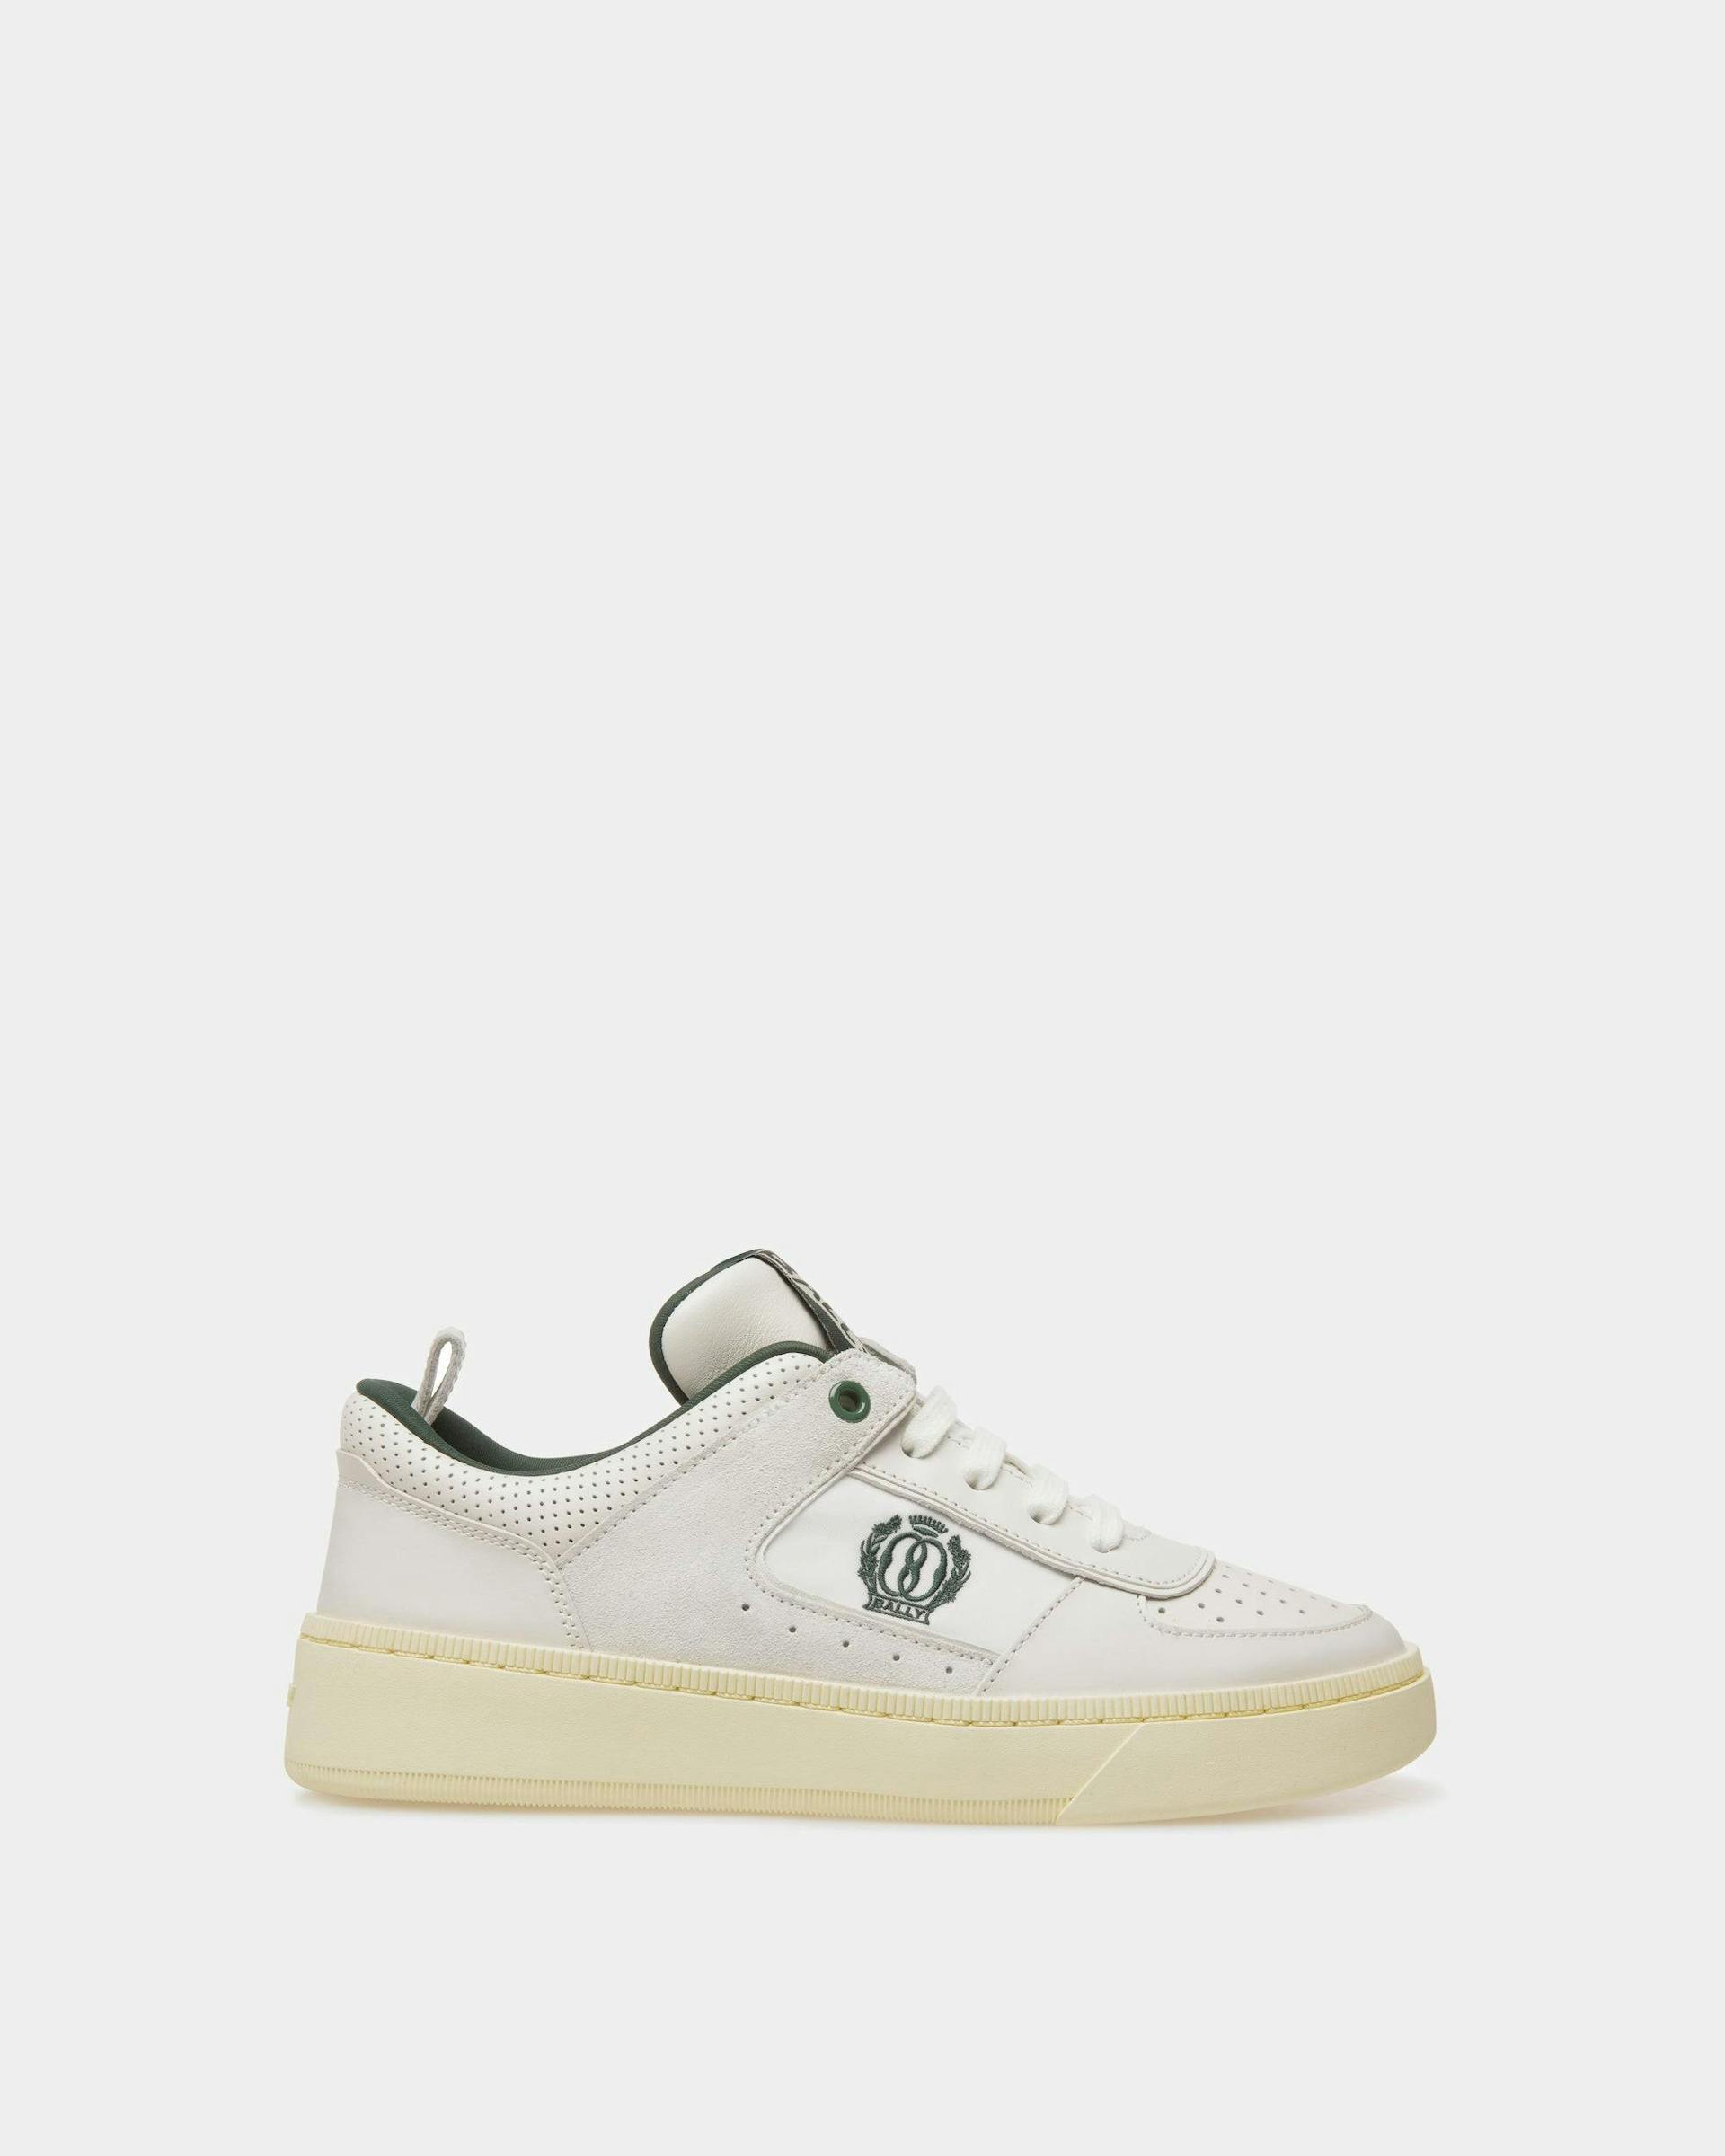 Women's Raise Sneakers In White And Green Leather | Bally | Still Life Side